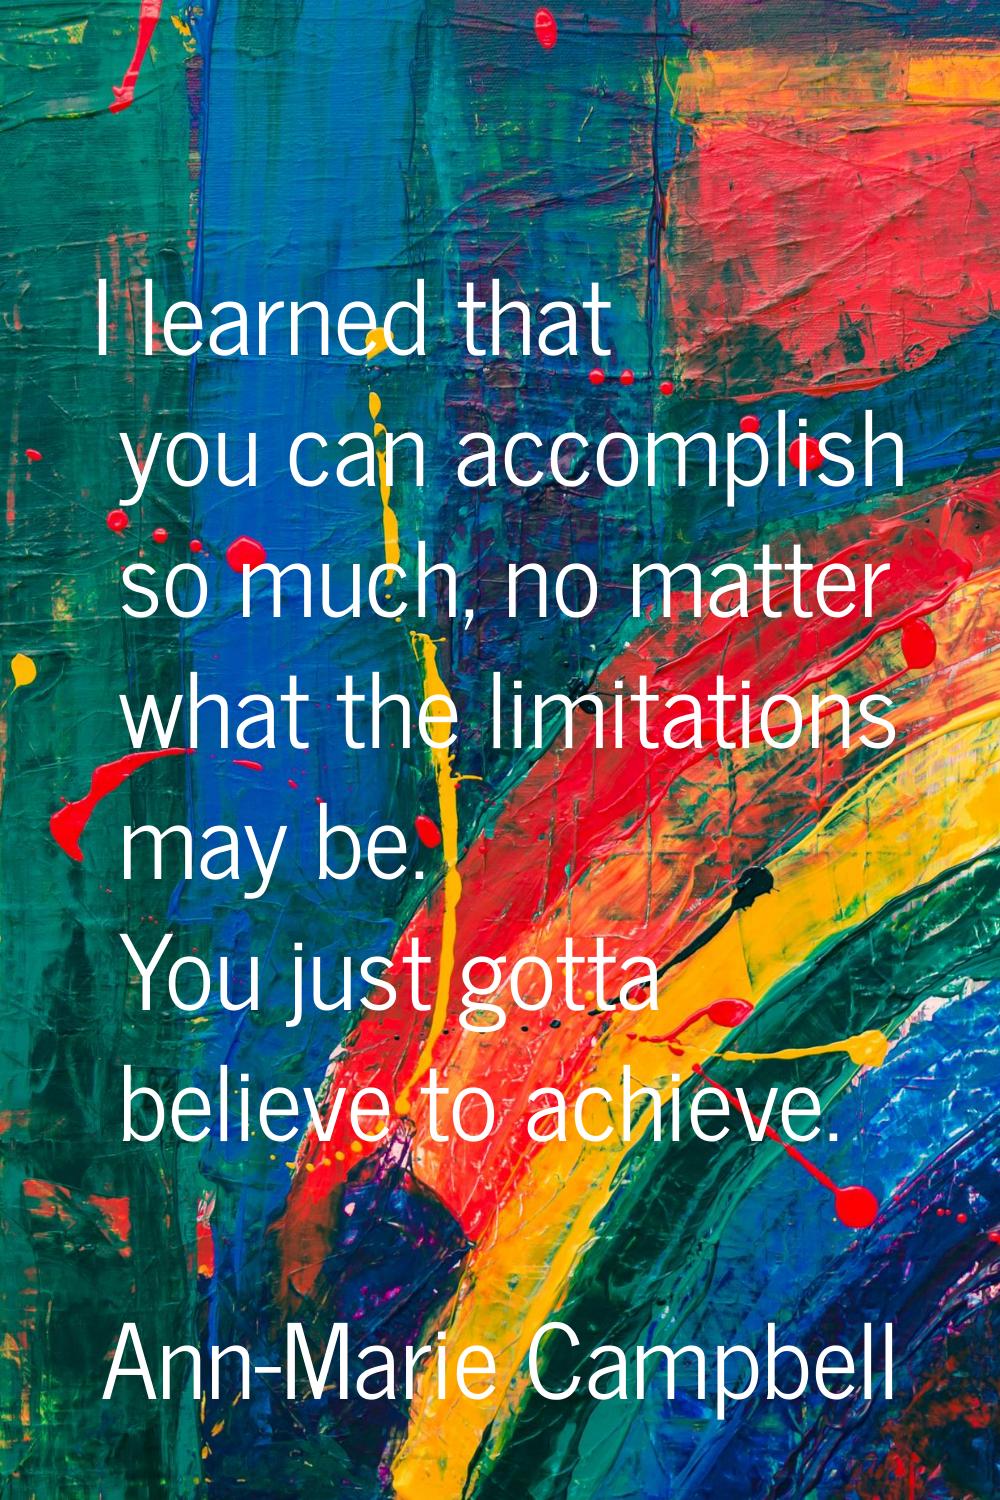 I learned that you can accomplish so much, no matter what the limitations may be. You just gotta be